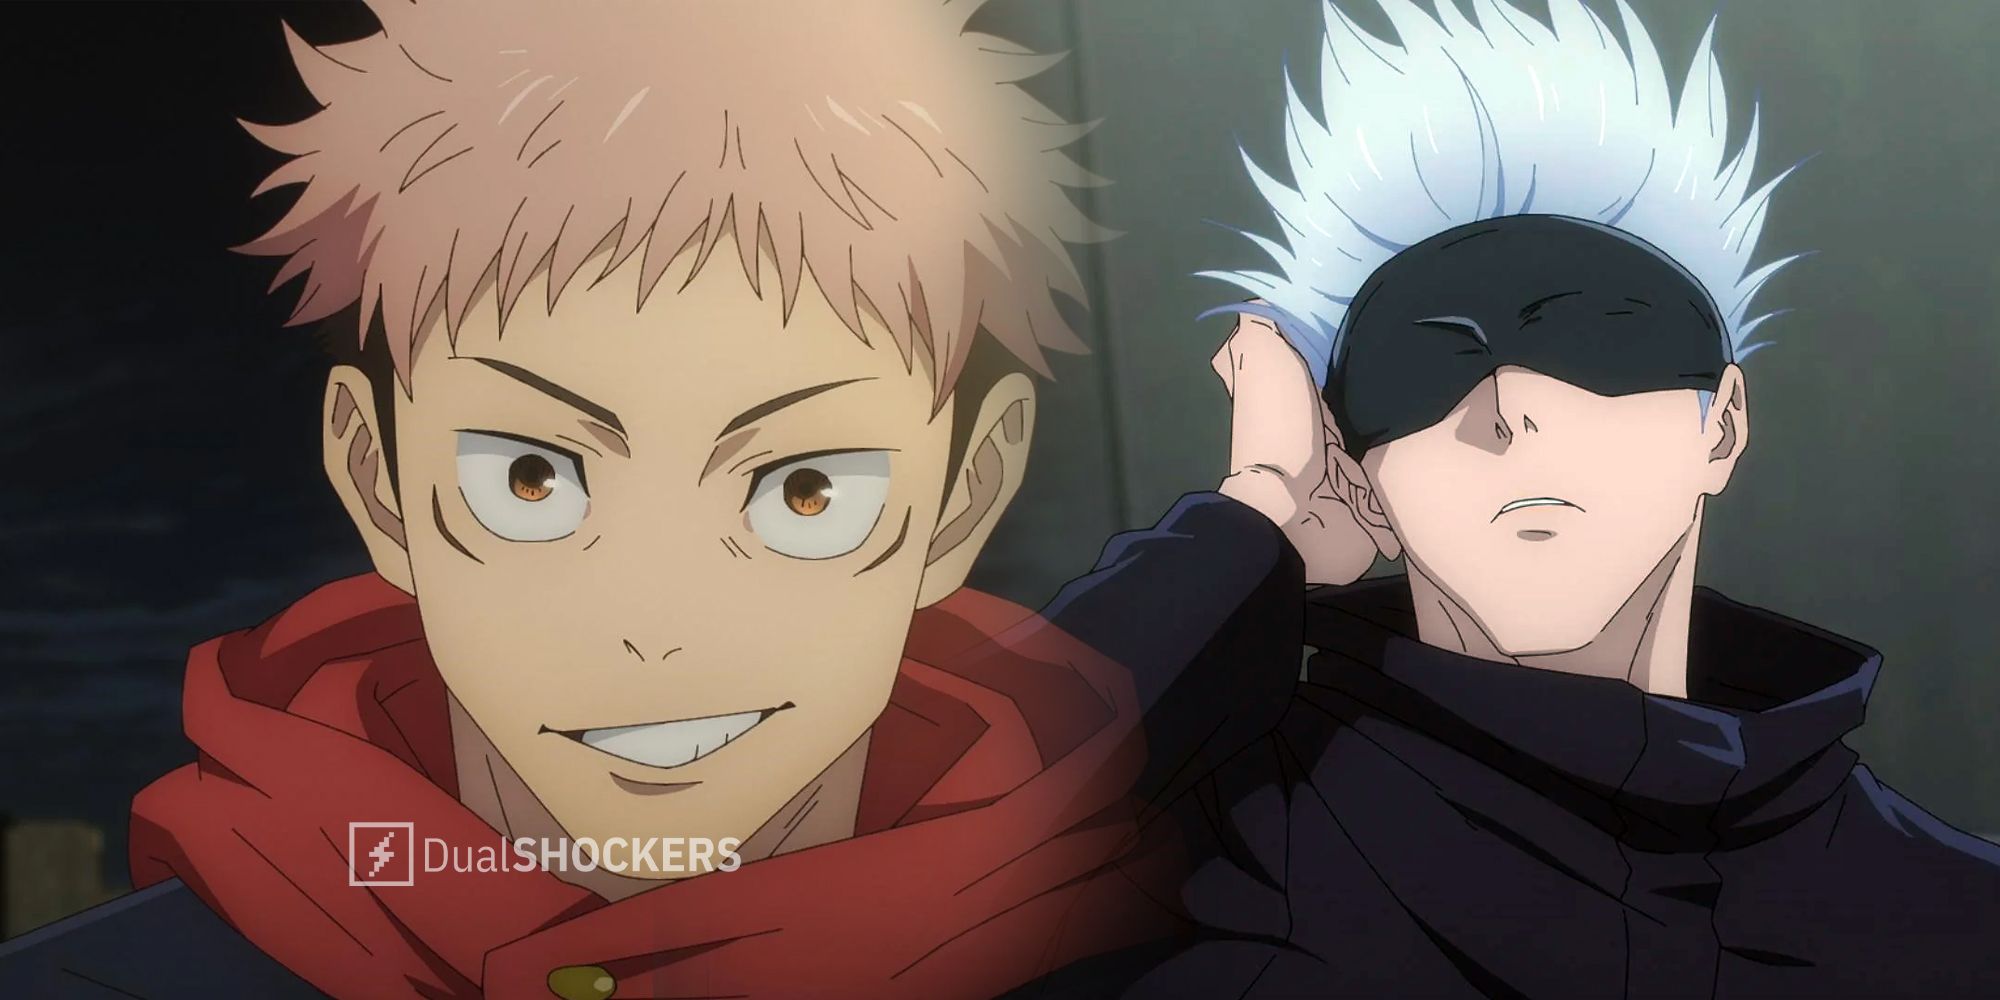 jujutsu kaisen season 2: Jujutsu Kaisen Season 2 Episode 13: The